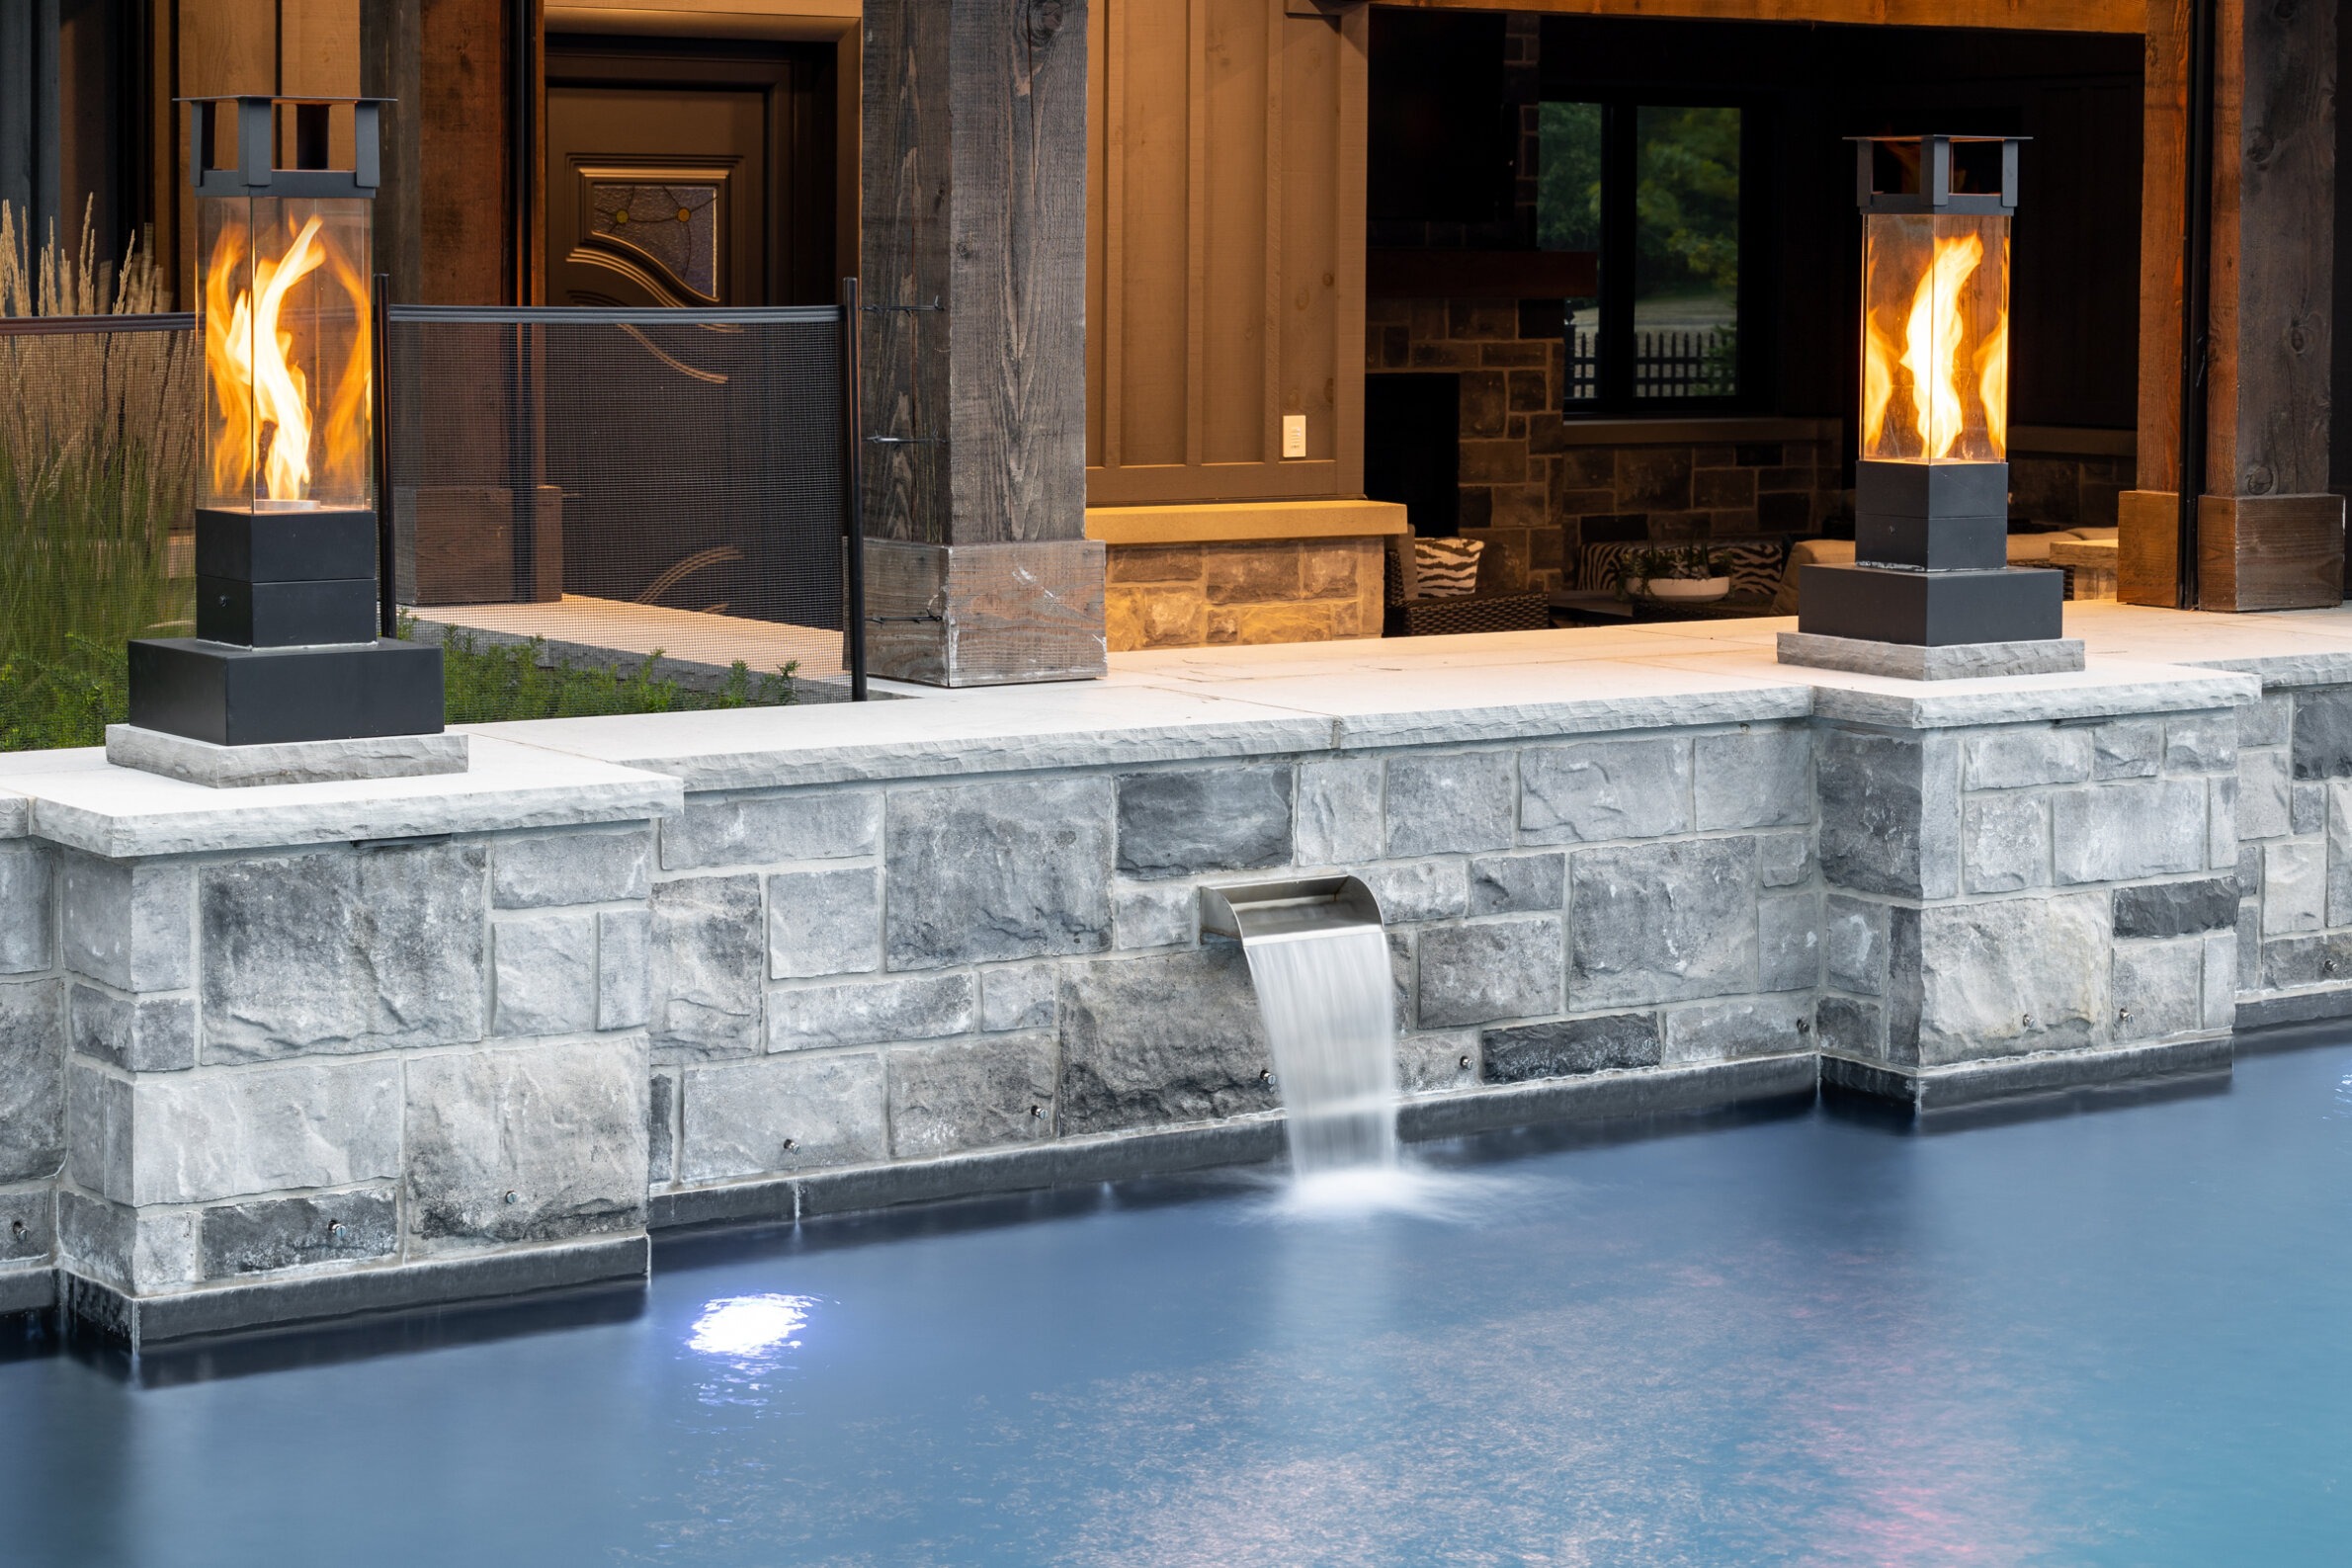 An outdoor patio features two flaming pillar torches beside a stone wall, overlooking a tranquil pool with a gently cascading water feature.